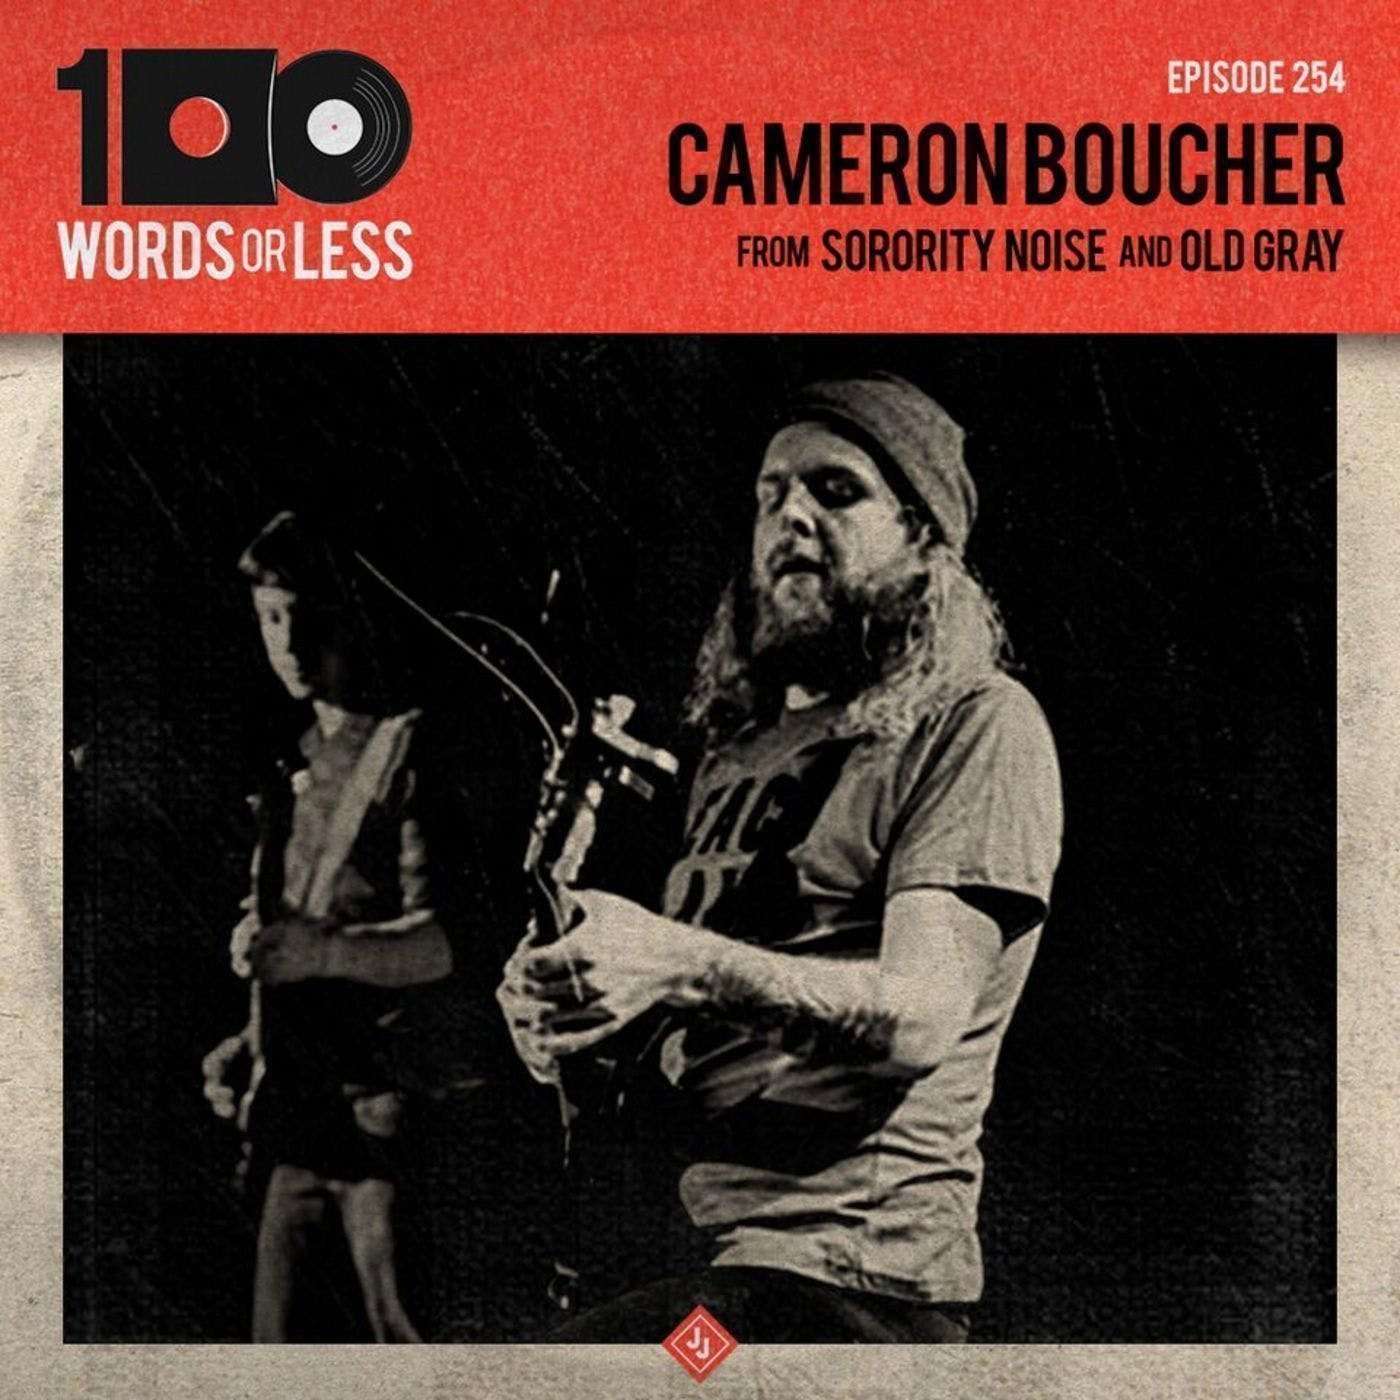 Cameron Boucher from Sorority Noise/Old Grey